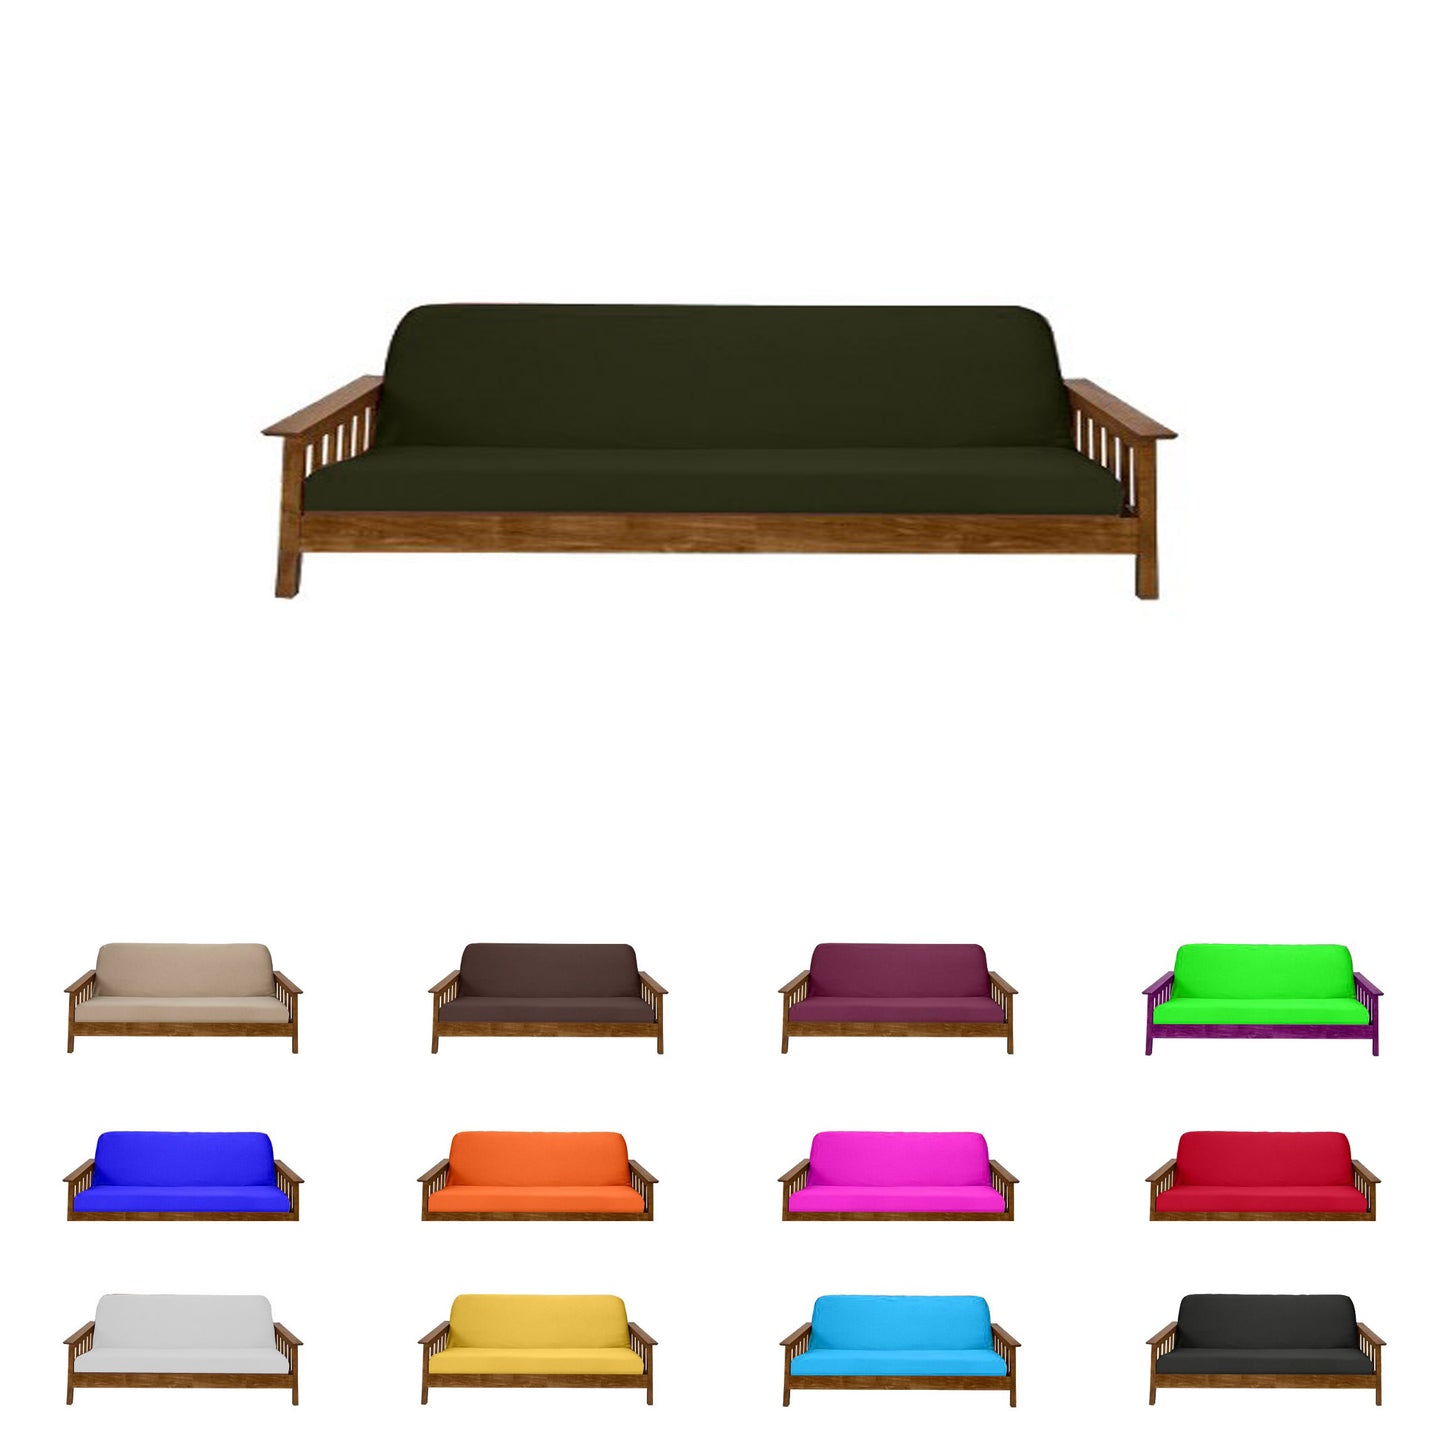 Futon Mattress Covers, Slipcovers, Bed Covering Protector, Solid Colors, 100% Polyester Poplin